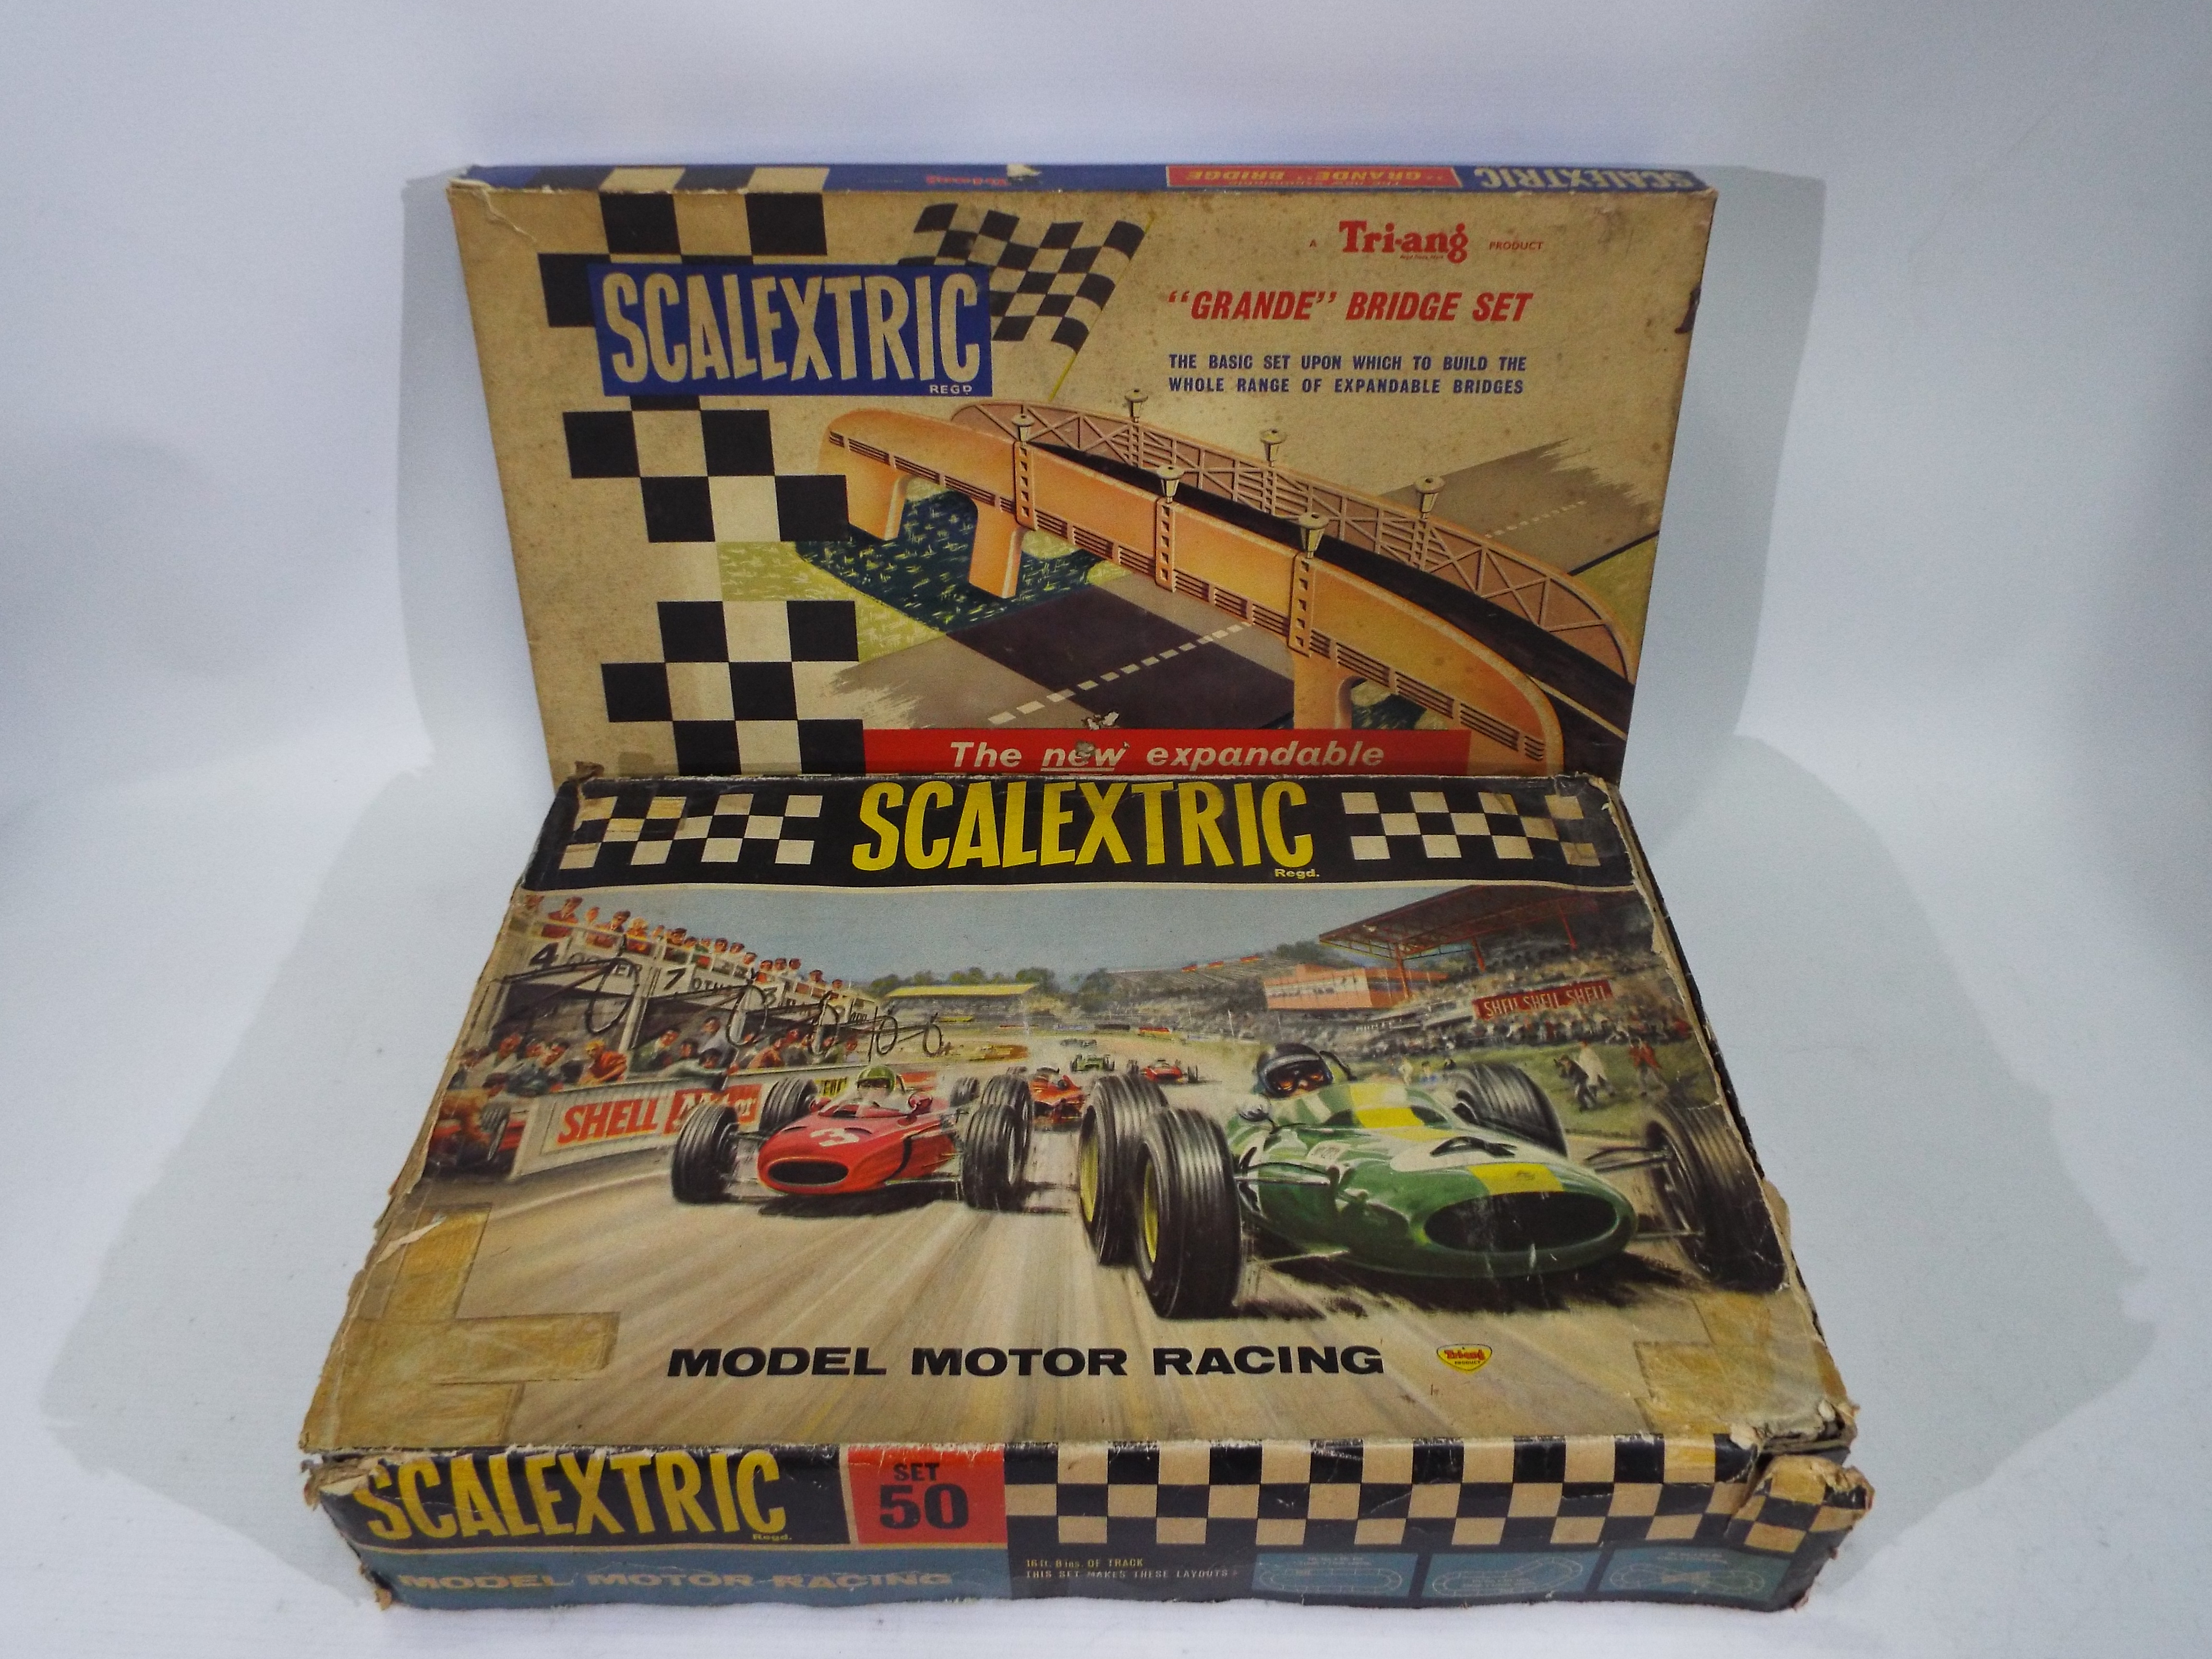 Scalextric - A vintage boxed Scalextric set and boxed Scalextric accessory.